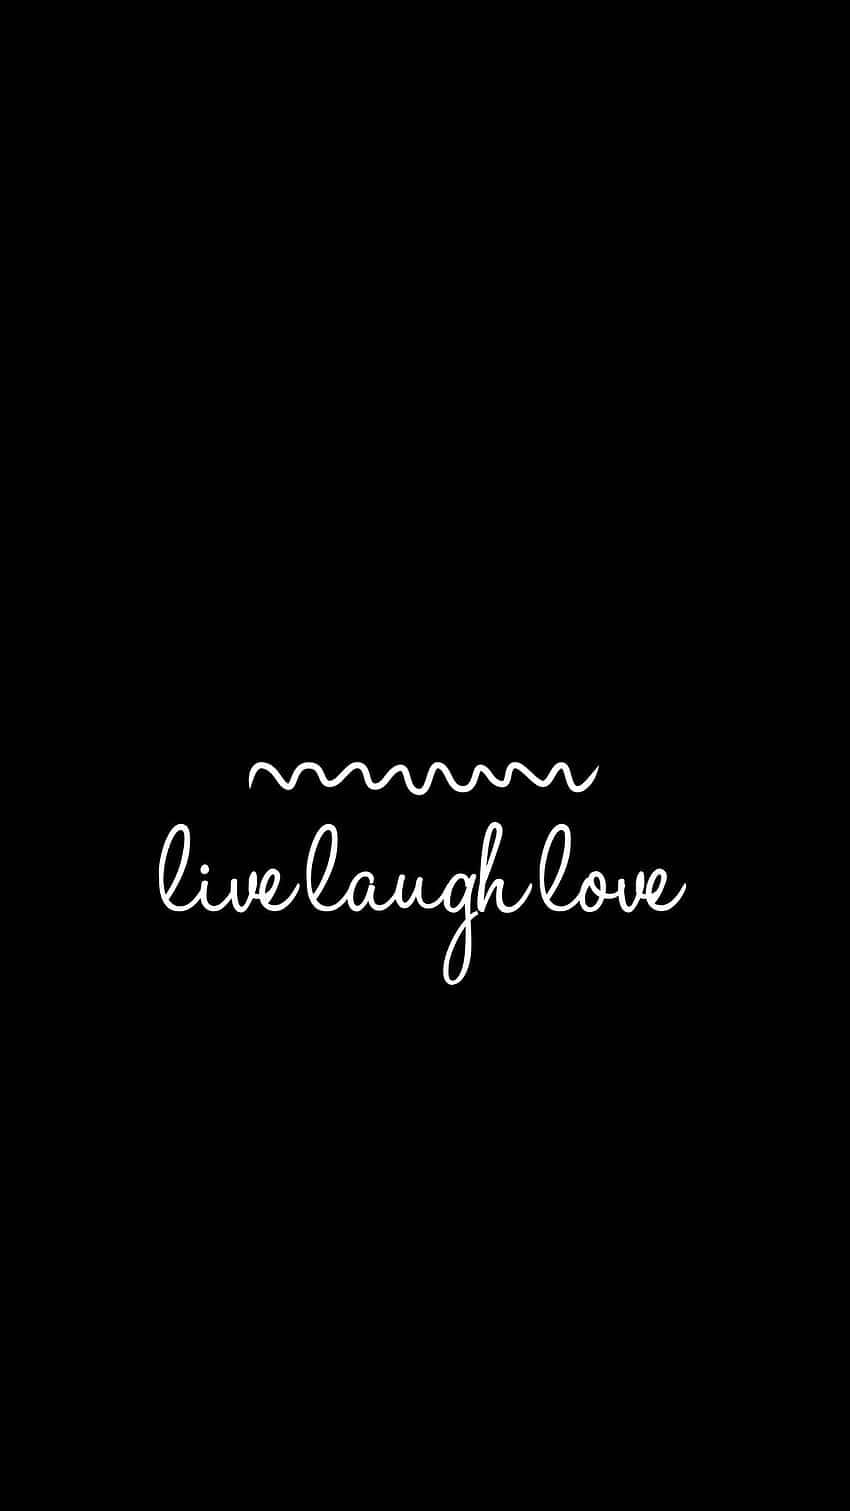 Live Laugh Love Squiggly Line Wallpaper